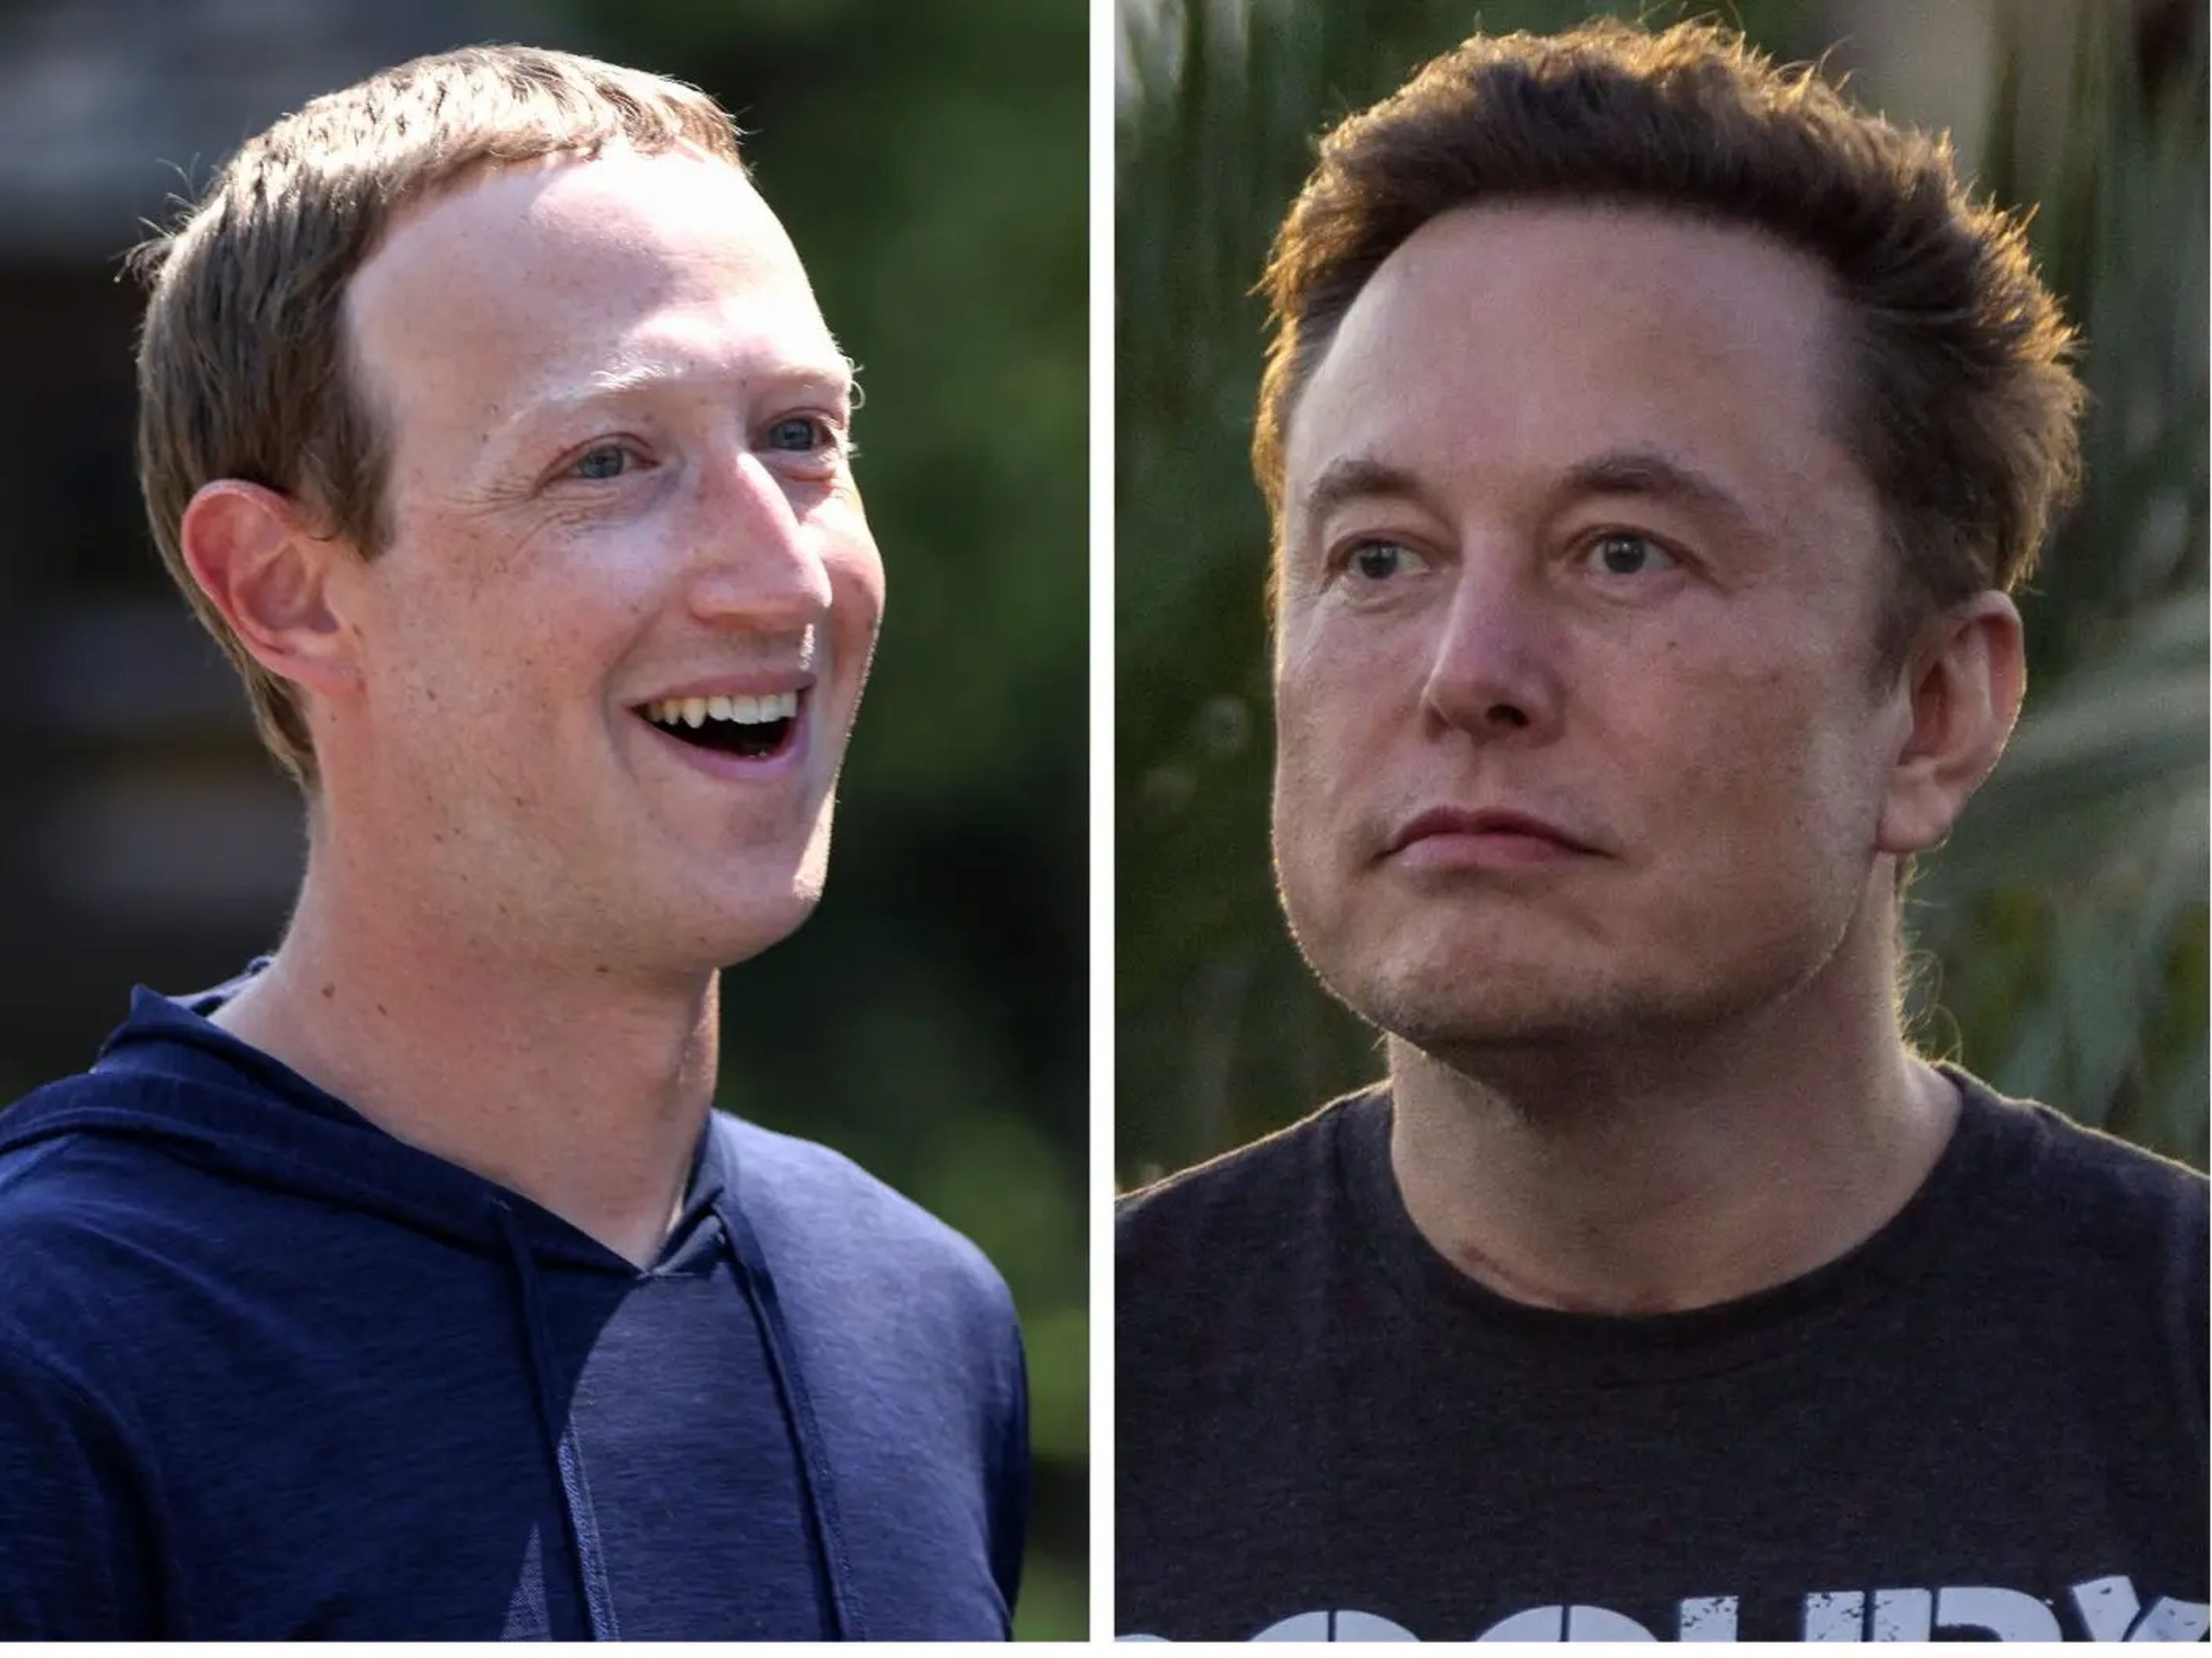 Side-by-side image of Mark Zuckerberg and Elon Musk.